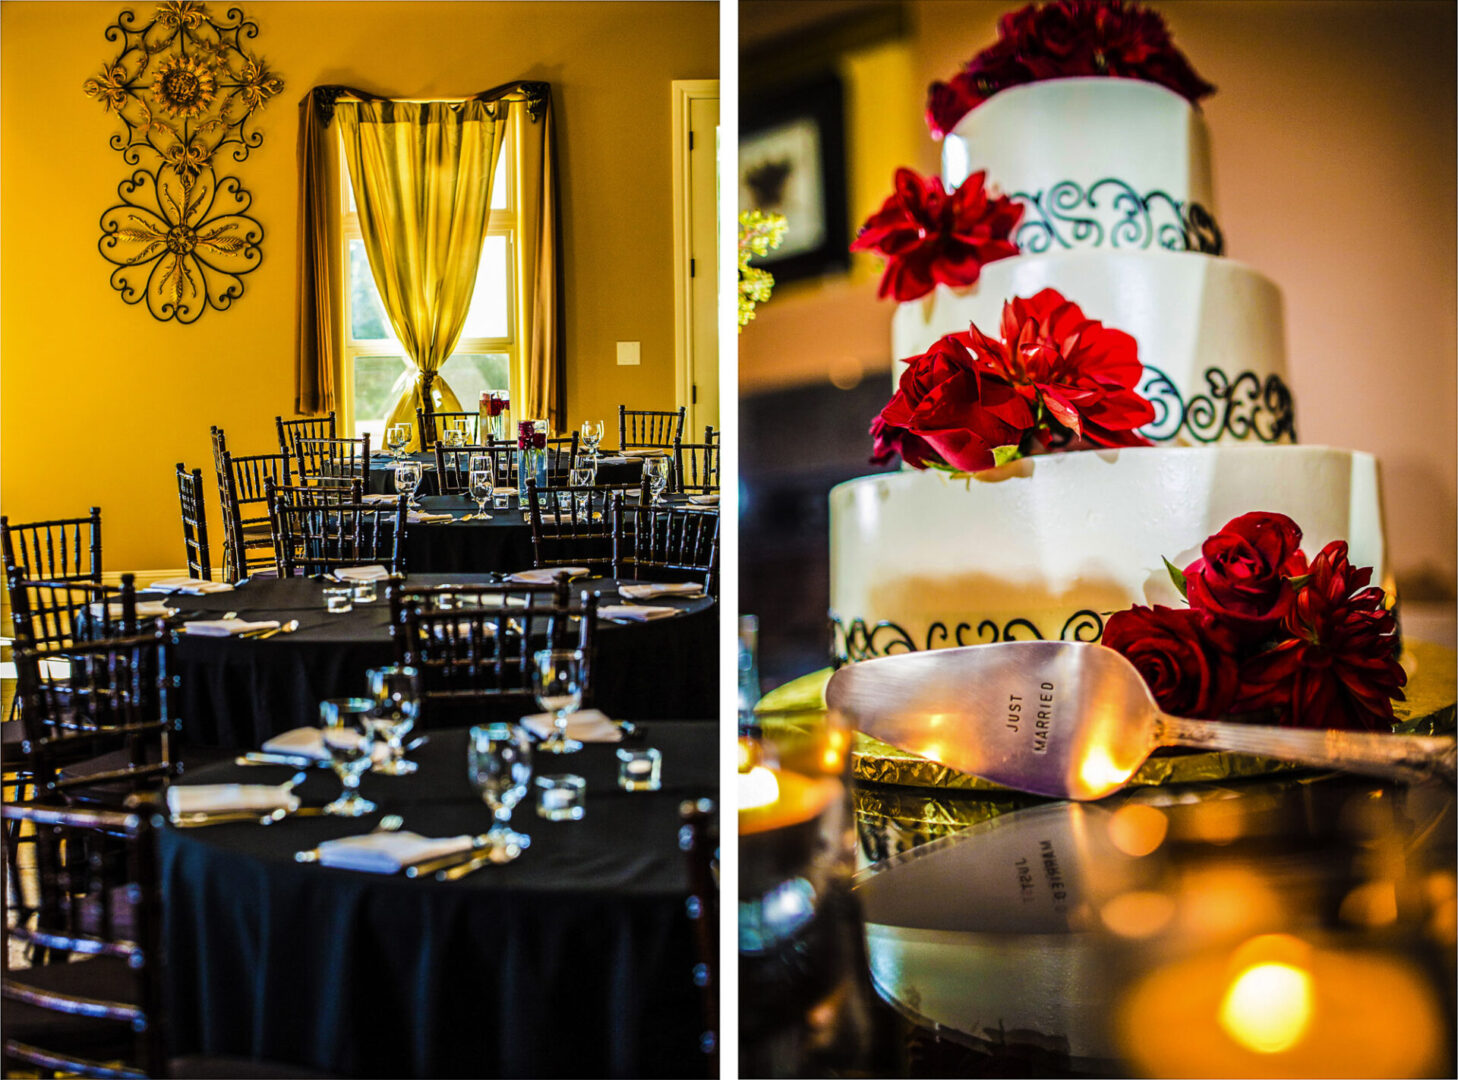 Collage image of cakes and a black color table